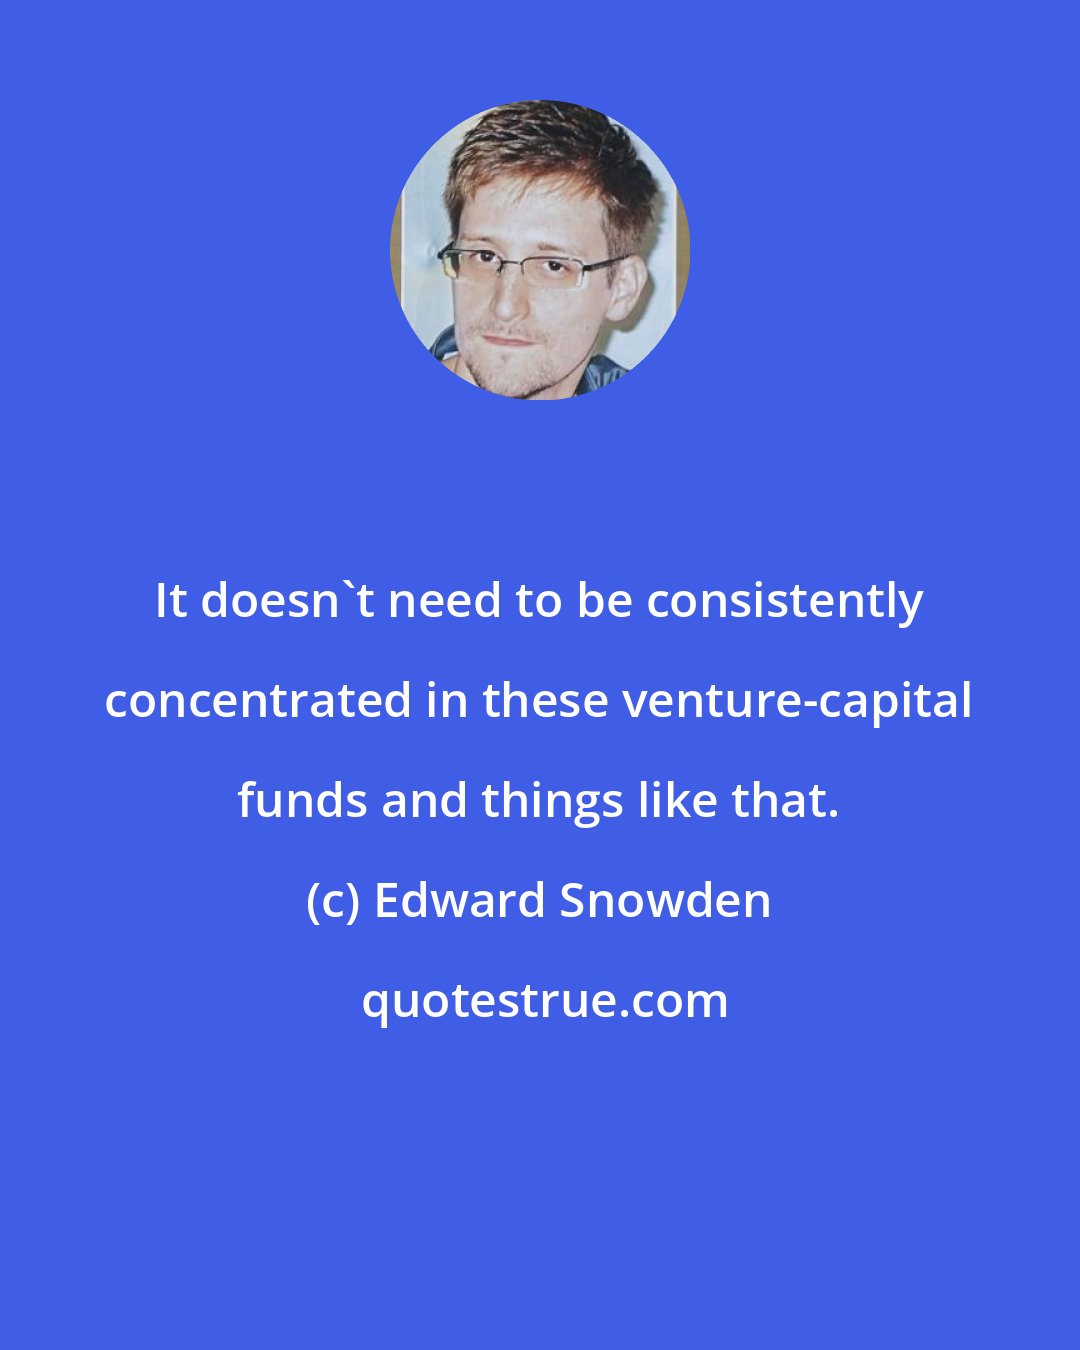 Edward Snowden: It doesn't need to be consistently concentrated in these venture-capital funds and things like that.